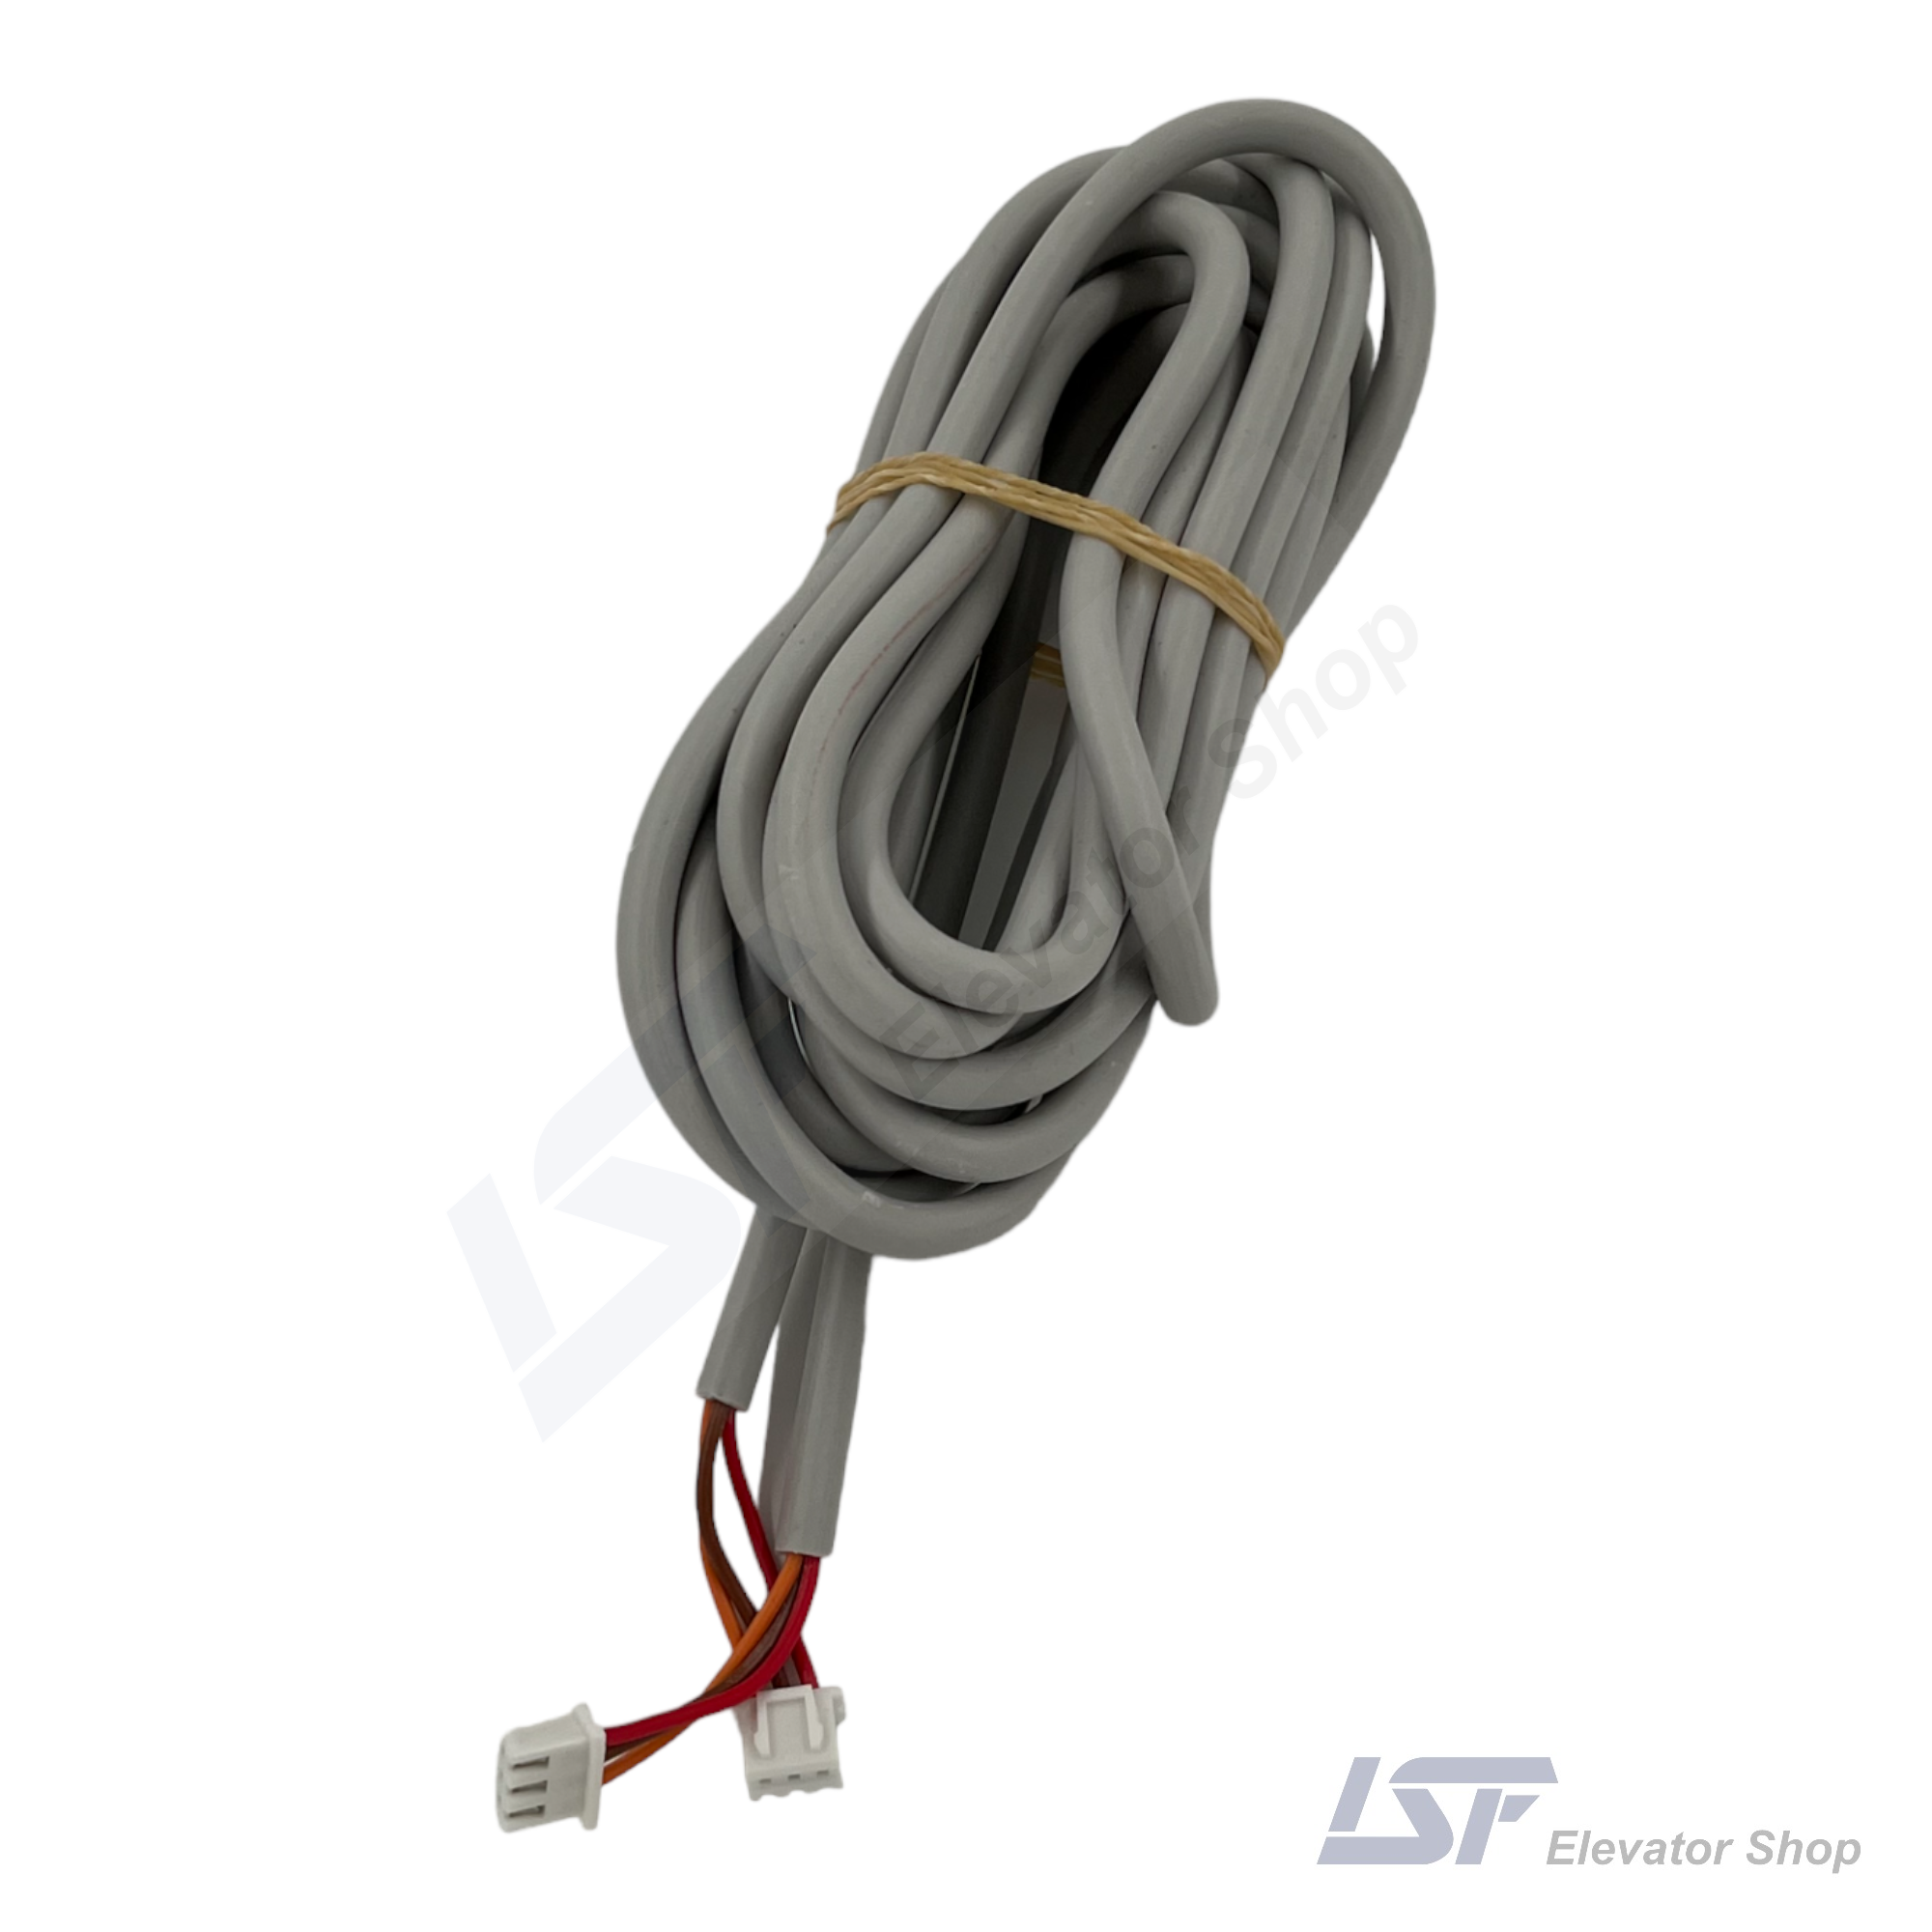 Arkel KBL-BT6 Button Cable 300cm (Double Female Connector) - Double Insulated